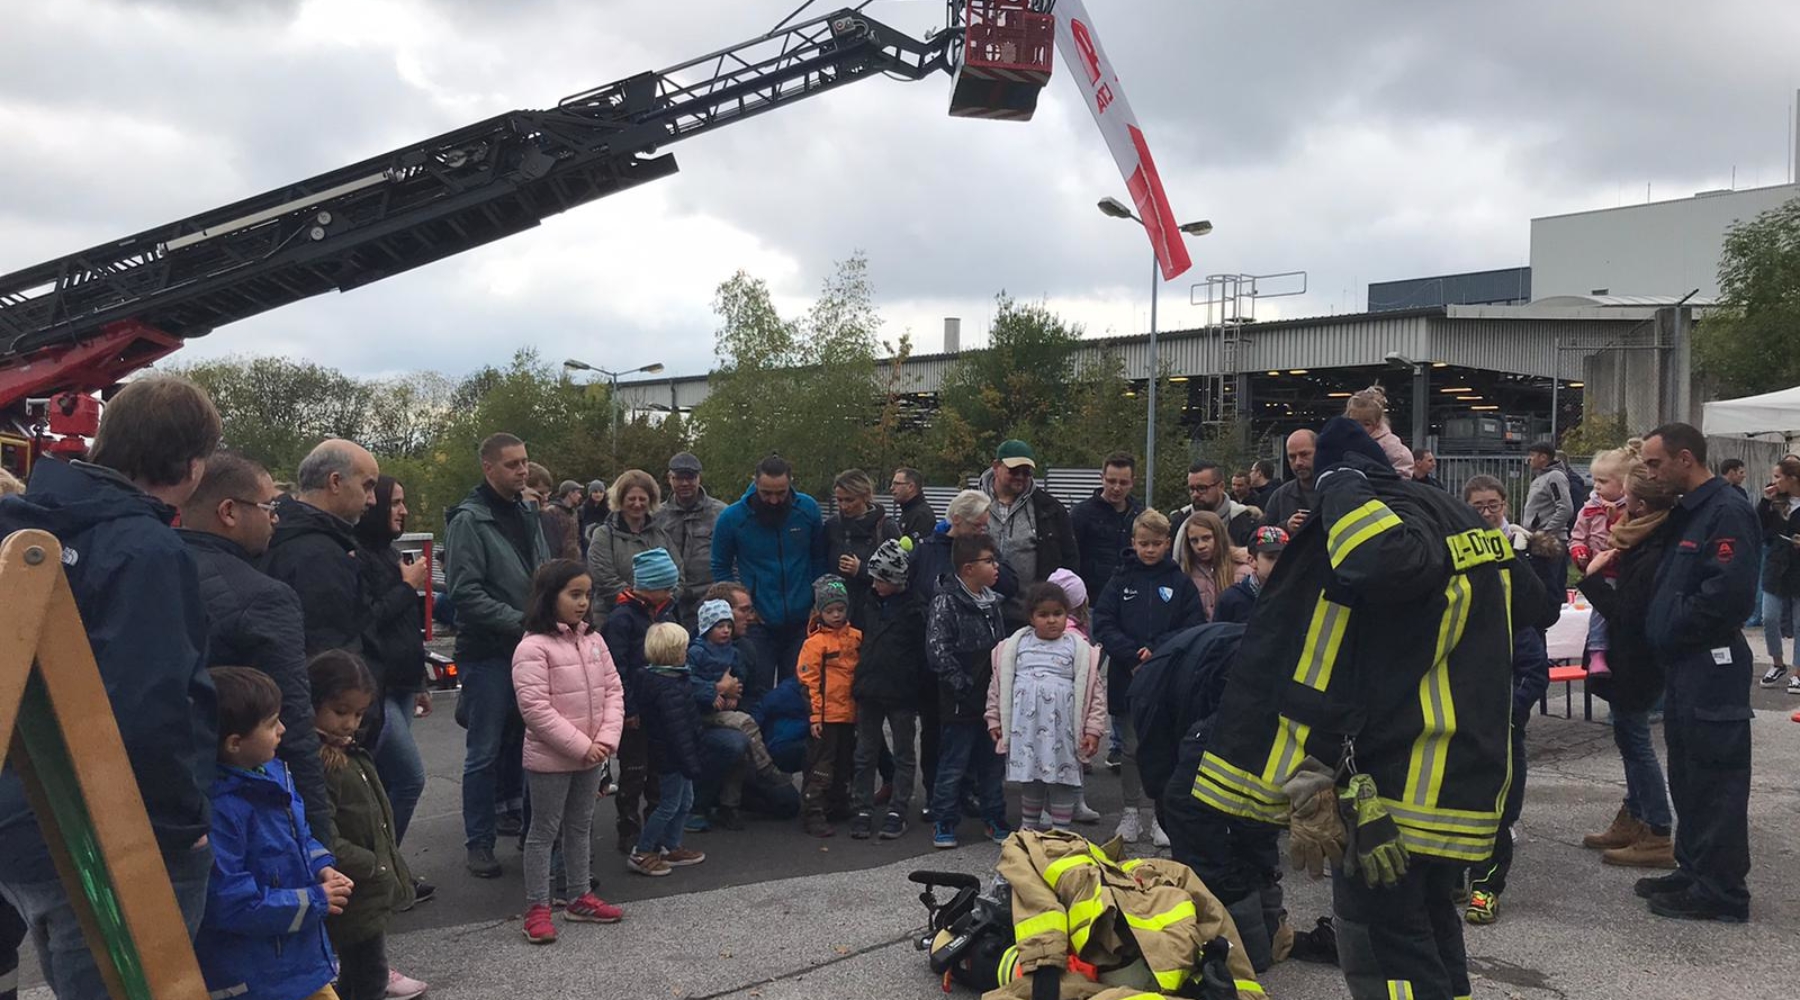 Fire Safety Day at Wuppertal, Germany site